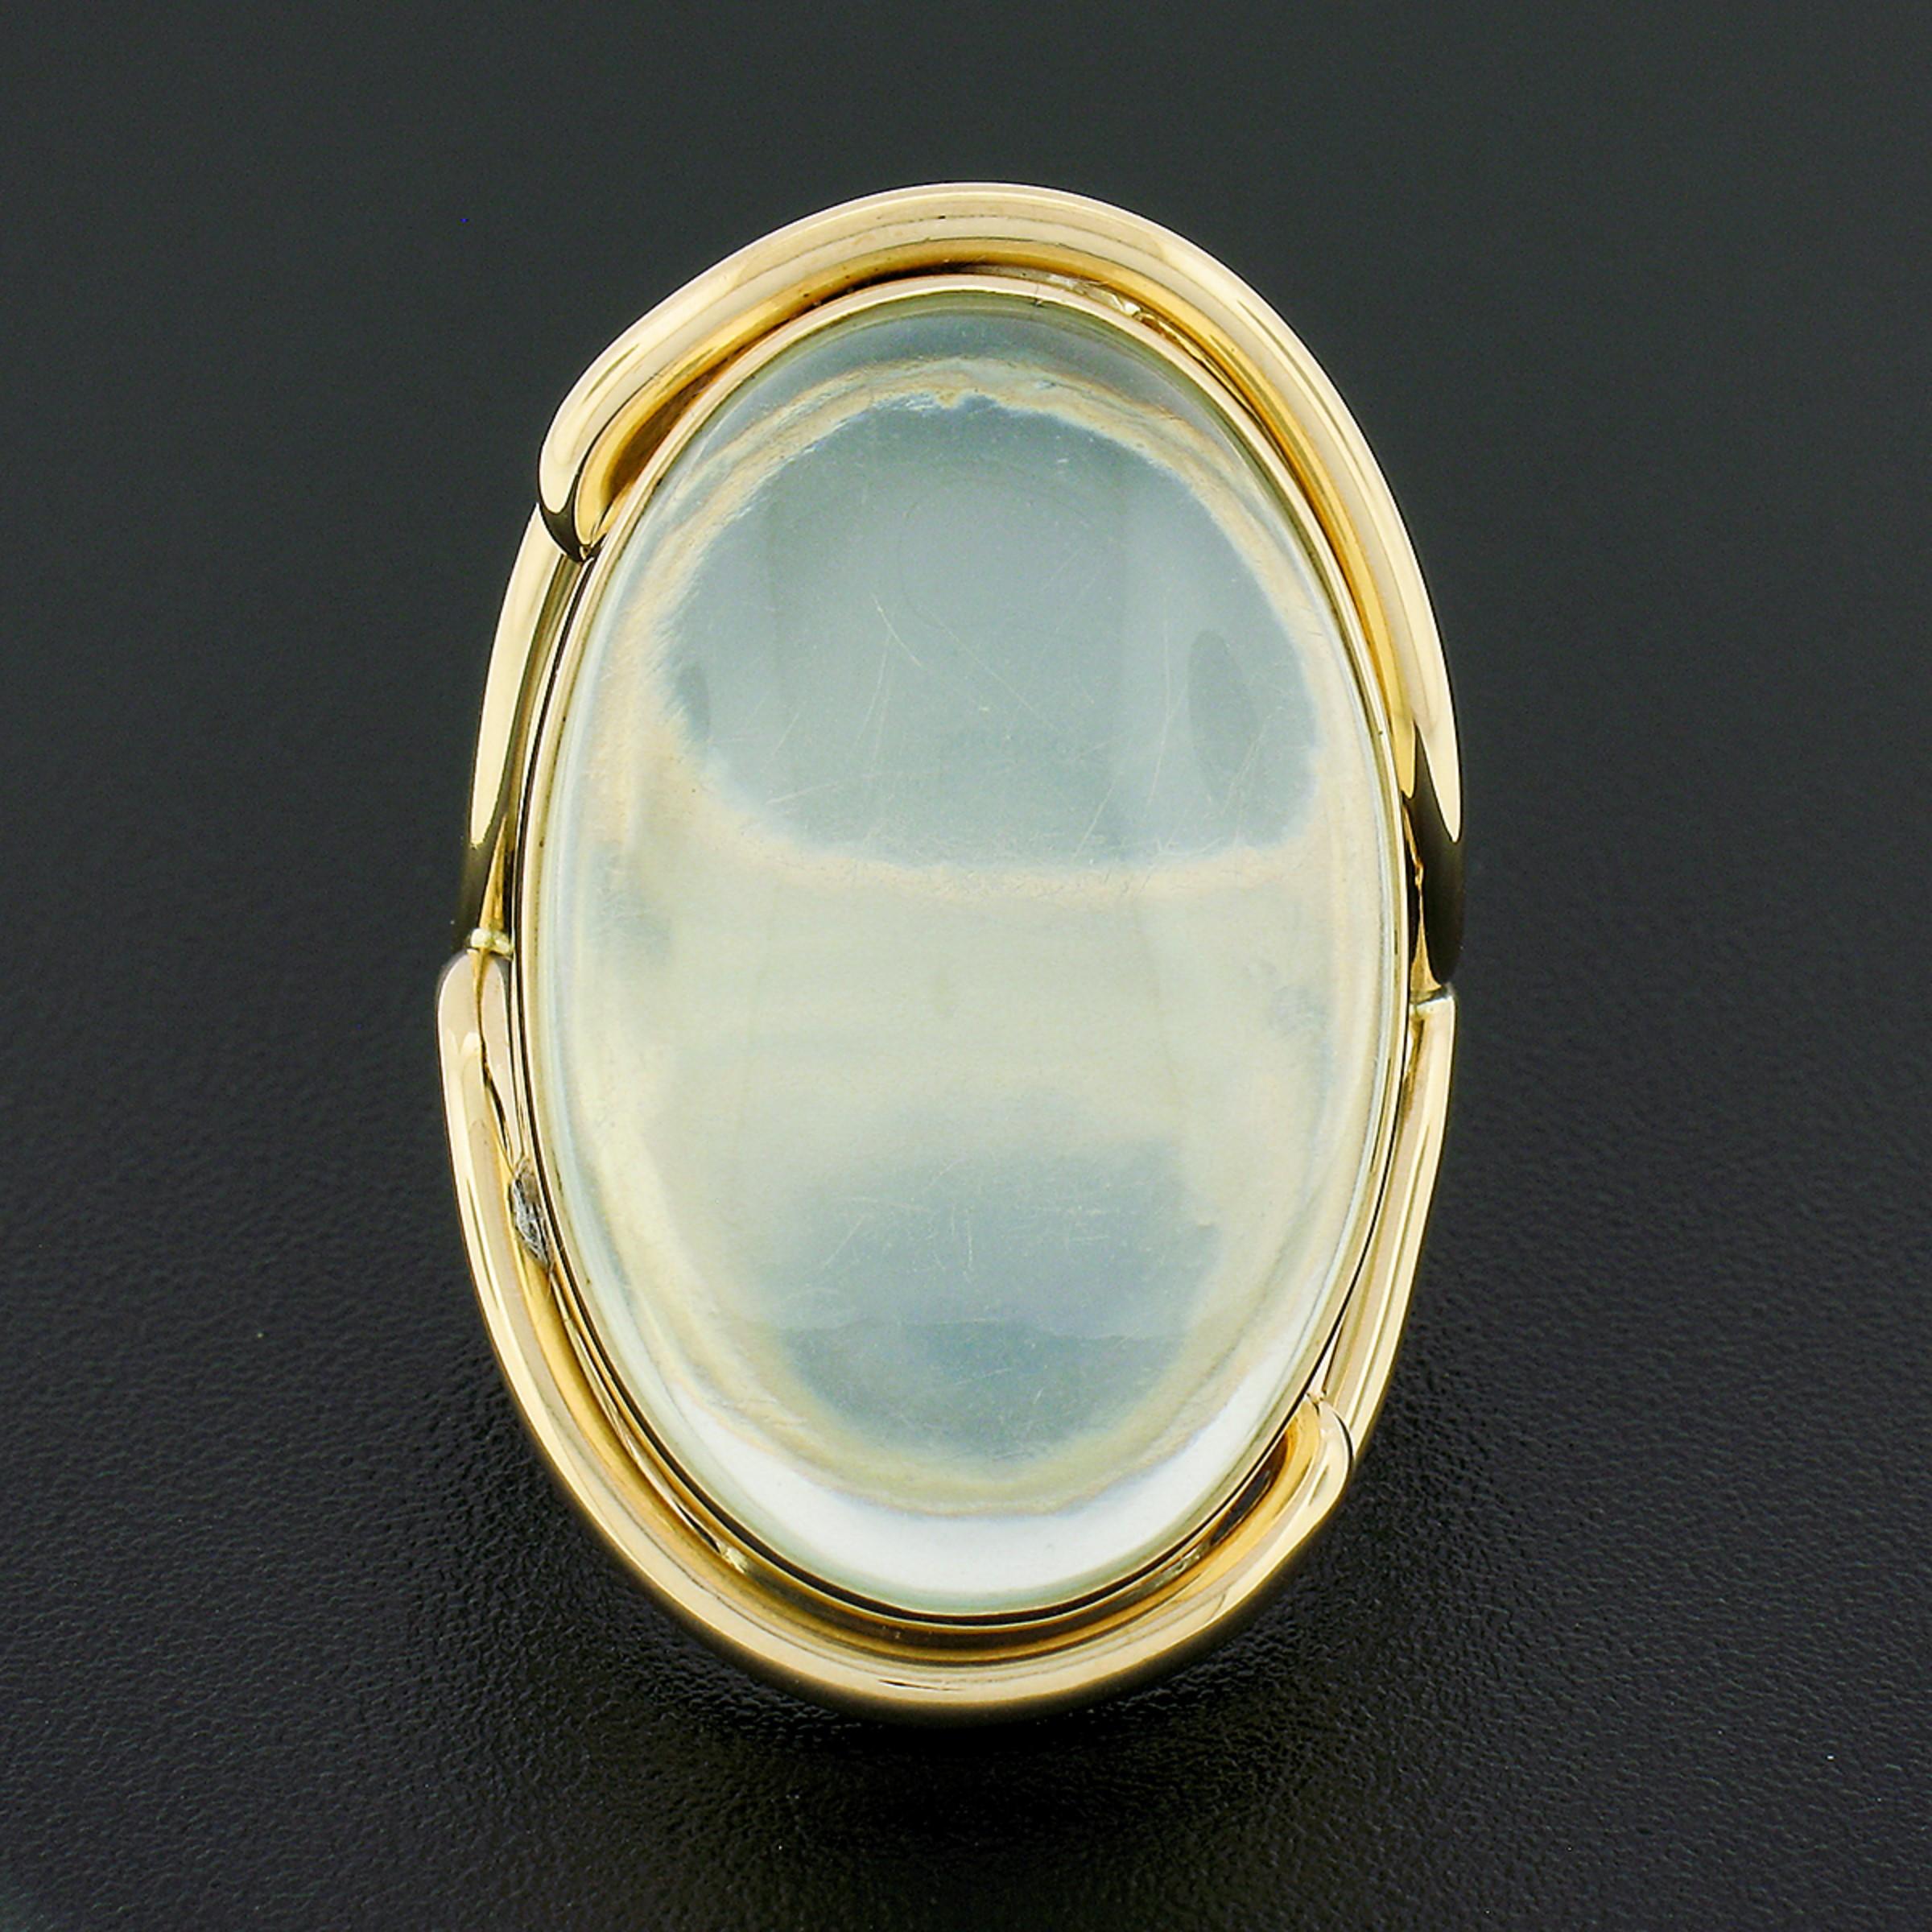 Here we have a truly bold and very well made ring crafted in solid 14k yellow gold and features a large, GIA certified, oval cabochon cut moonstone neatly bezel set at the center. The solitaire has a truly gorgeous and clean transparent light yellow